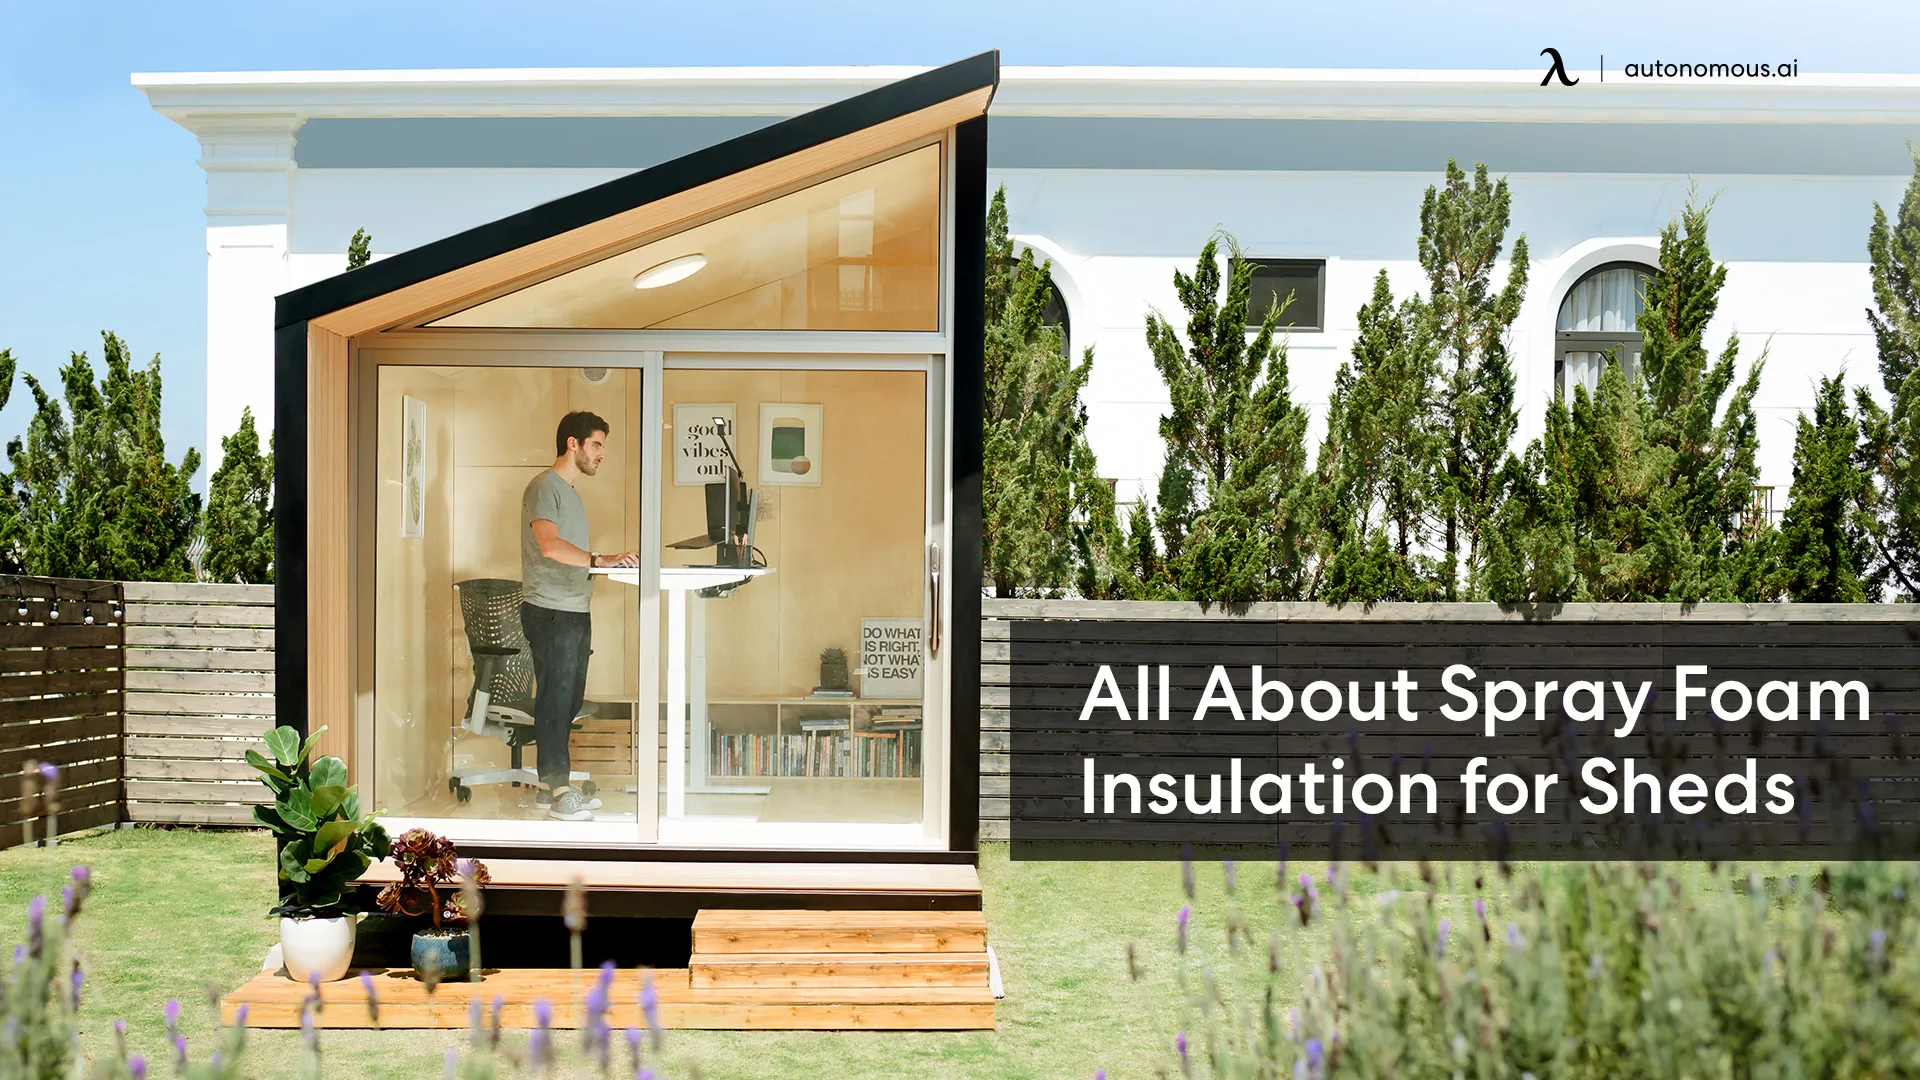 Should You Use Spray Foam Insulation for Your Shed?